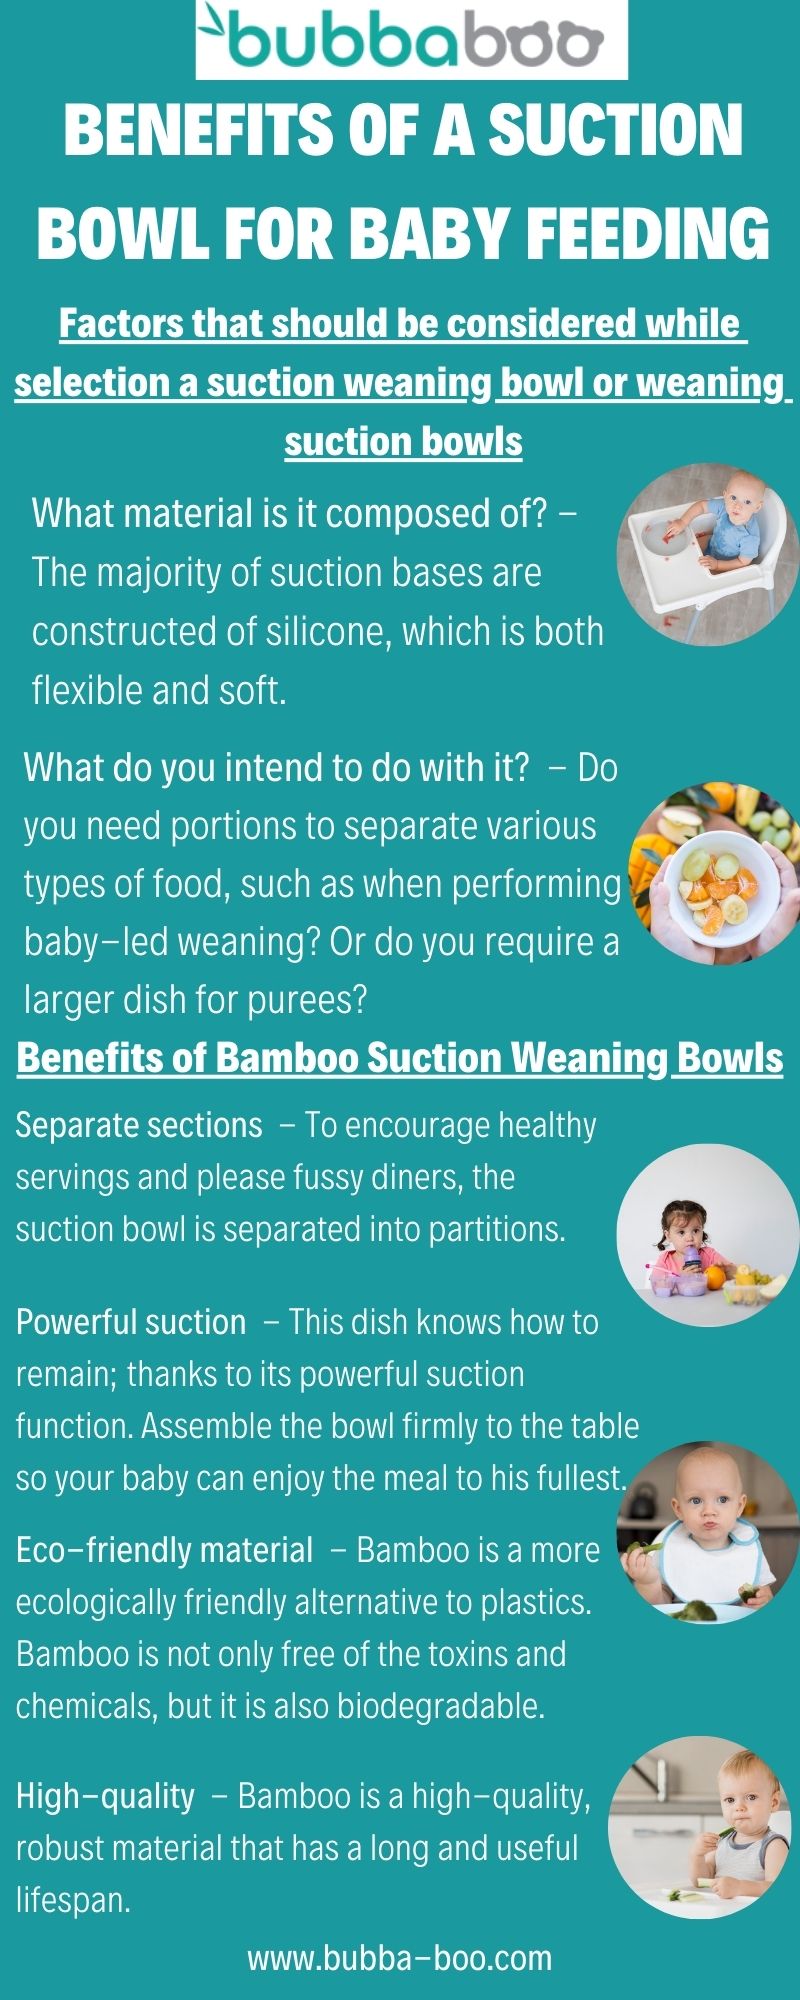 BENEFITS OF A SUCTION BOWL FOR BABY FEEDING